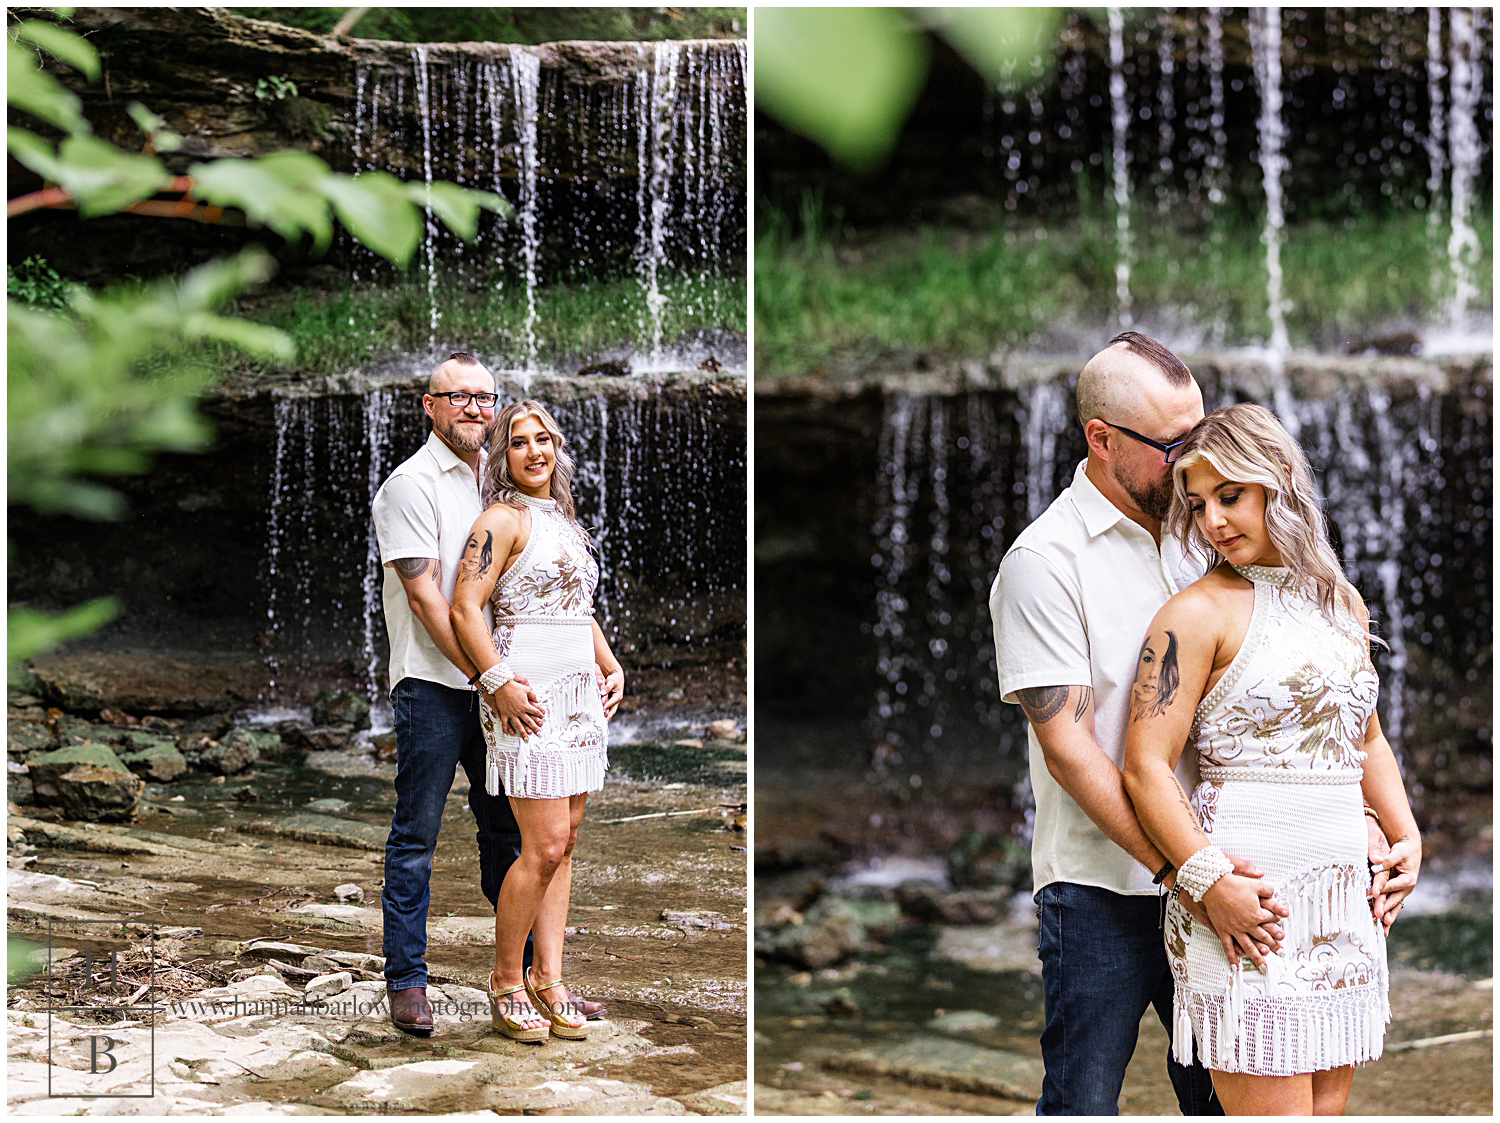 Couple snuggles and poses by waterfall for engagement photos.